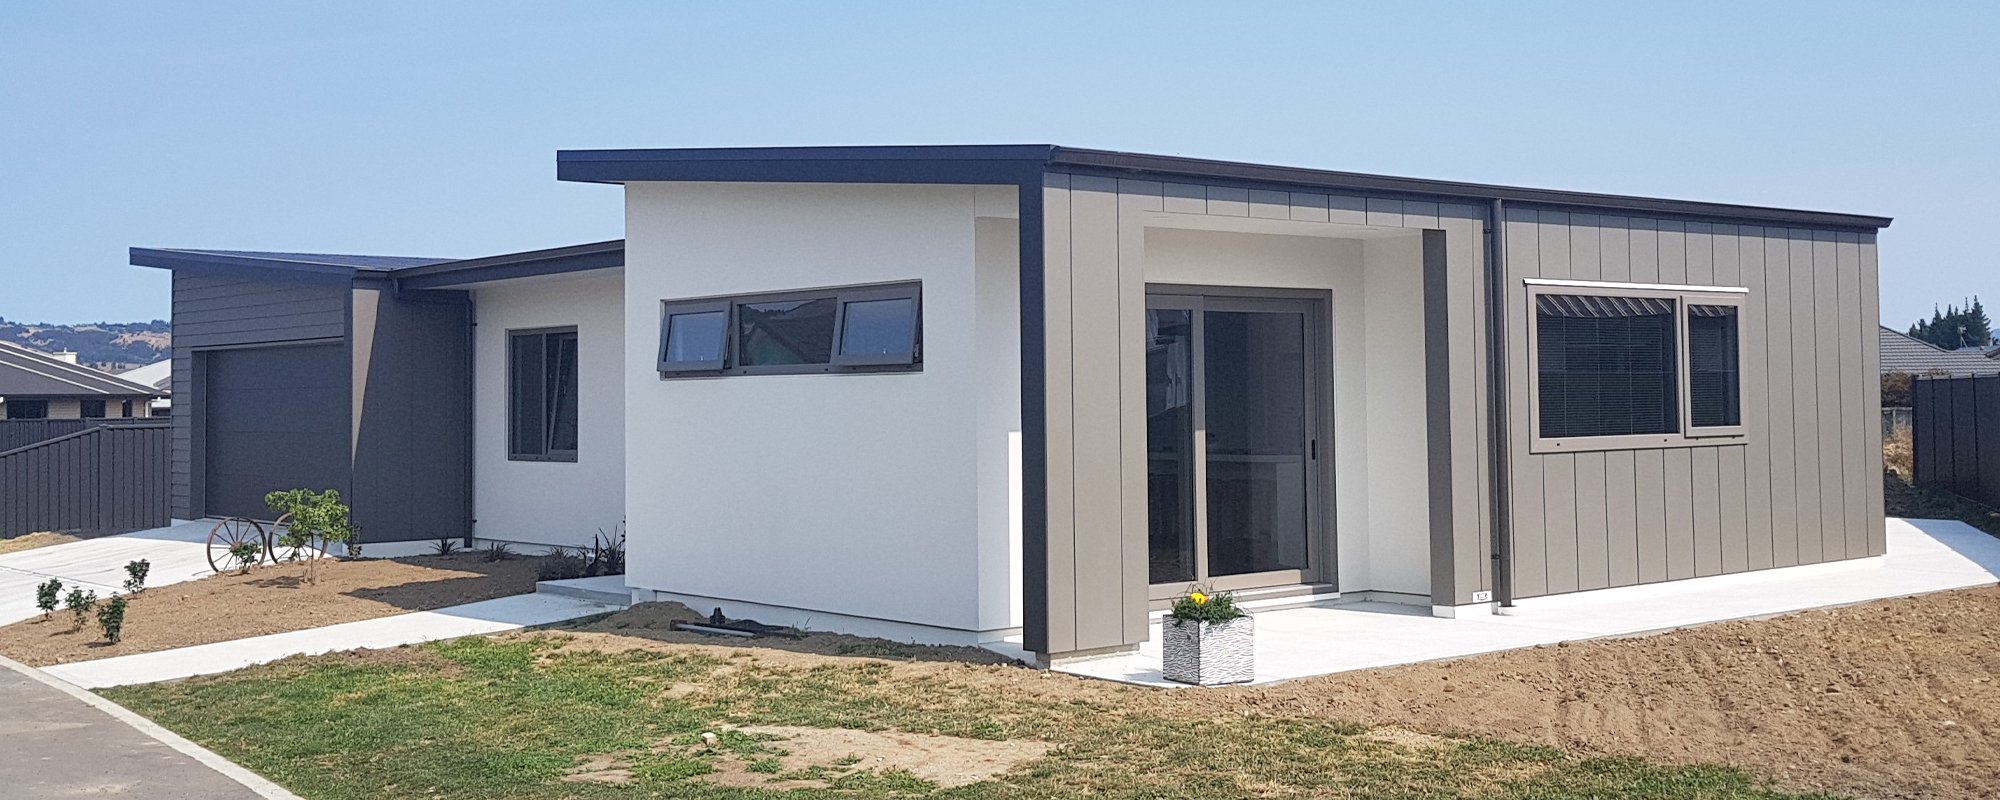 Modern newbuild home with a white, grey and black exterior and dark upvc window and door frames